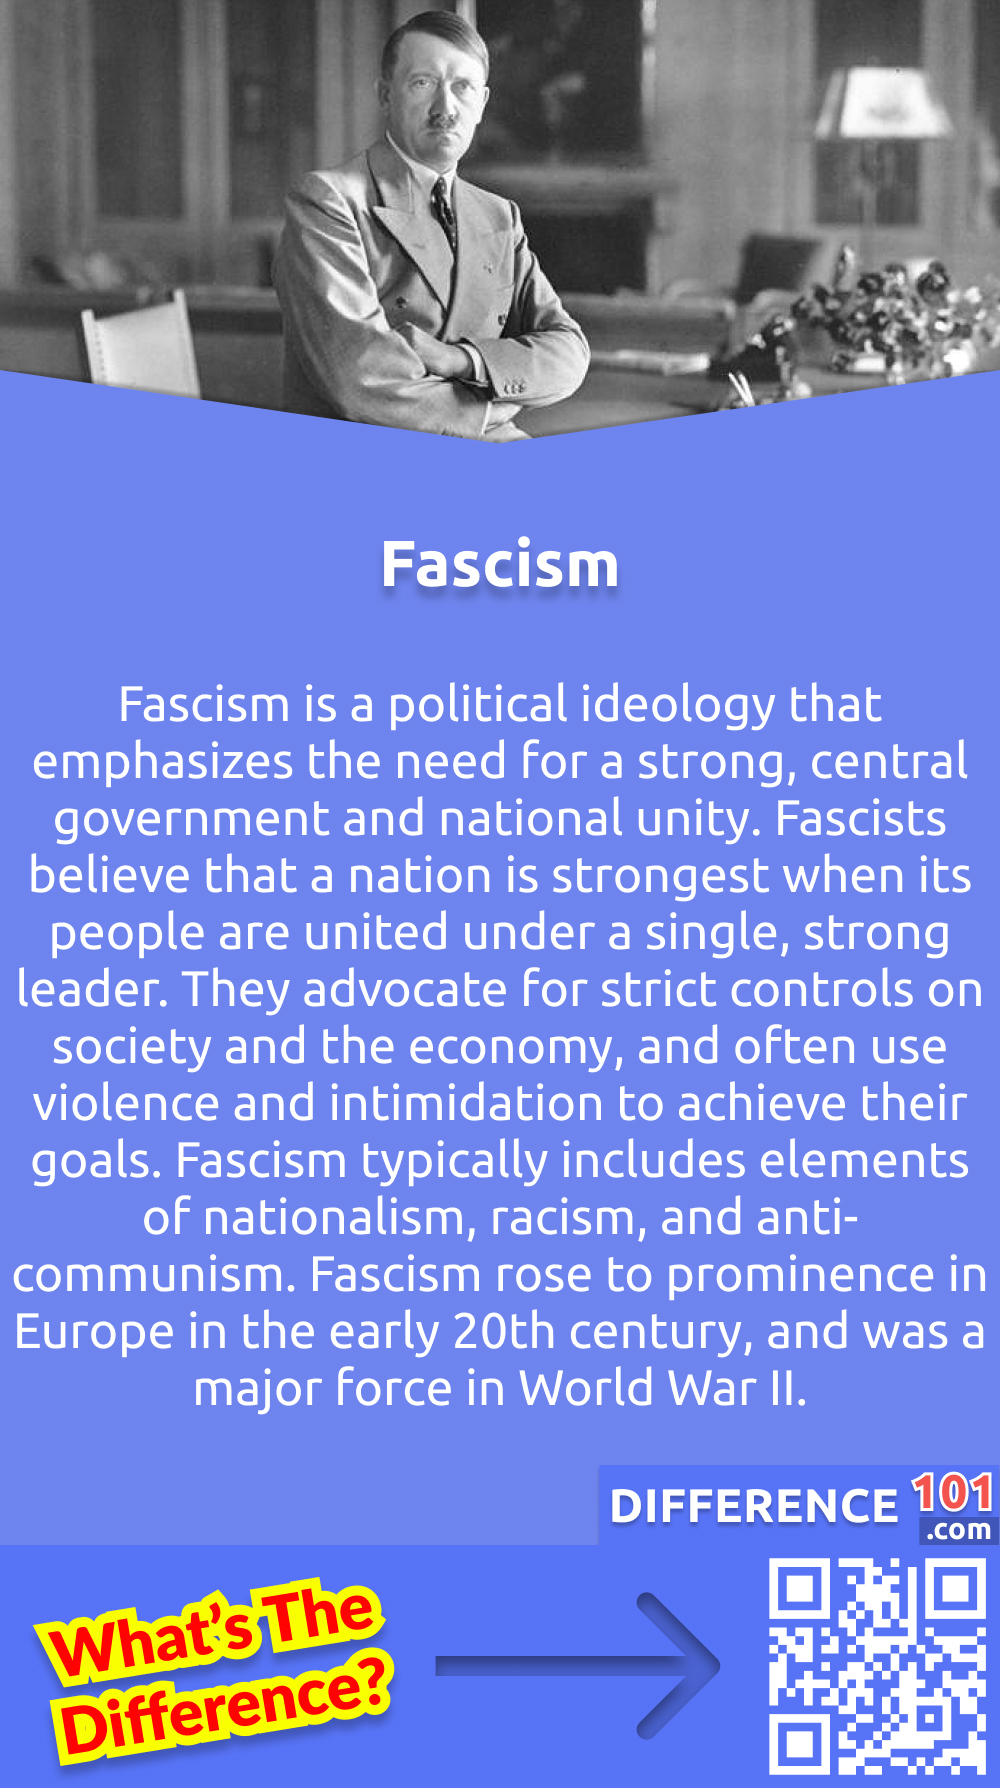 What Is Fascism? Fascism is a political ideology that emphasizes the need for a strong, central government and national unity. Fascists believe that a nation is strongest when its people are united under a single, strong leader. They advocate for strict controls on society and the economy, and often use violence and intimidation to achieve their goals. Fascism typically includes elements of nationalism, racism, and anti-communism. Fascism rose to prominence in Europe in the early 20th century, and was a major force in World War II.